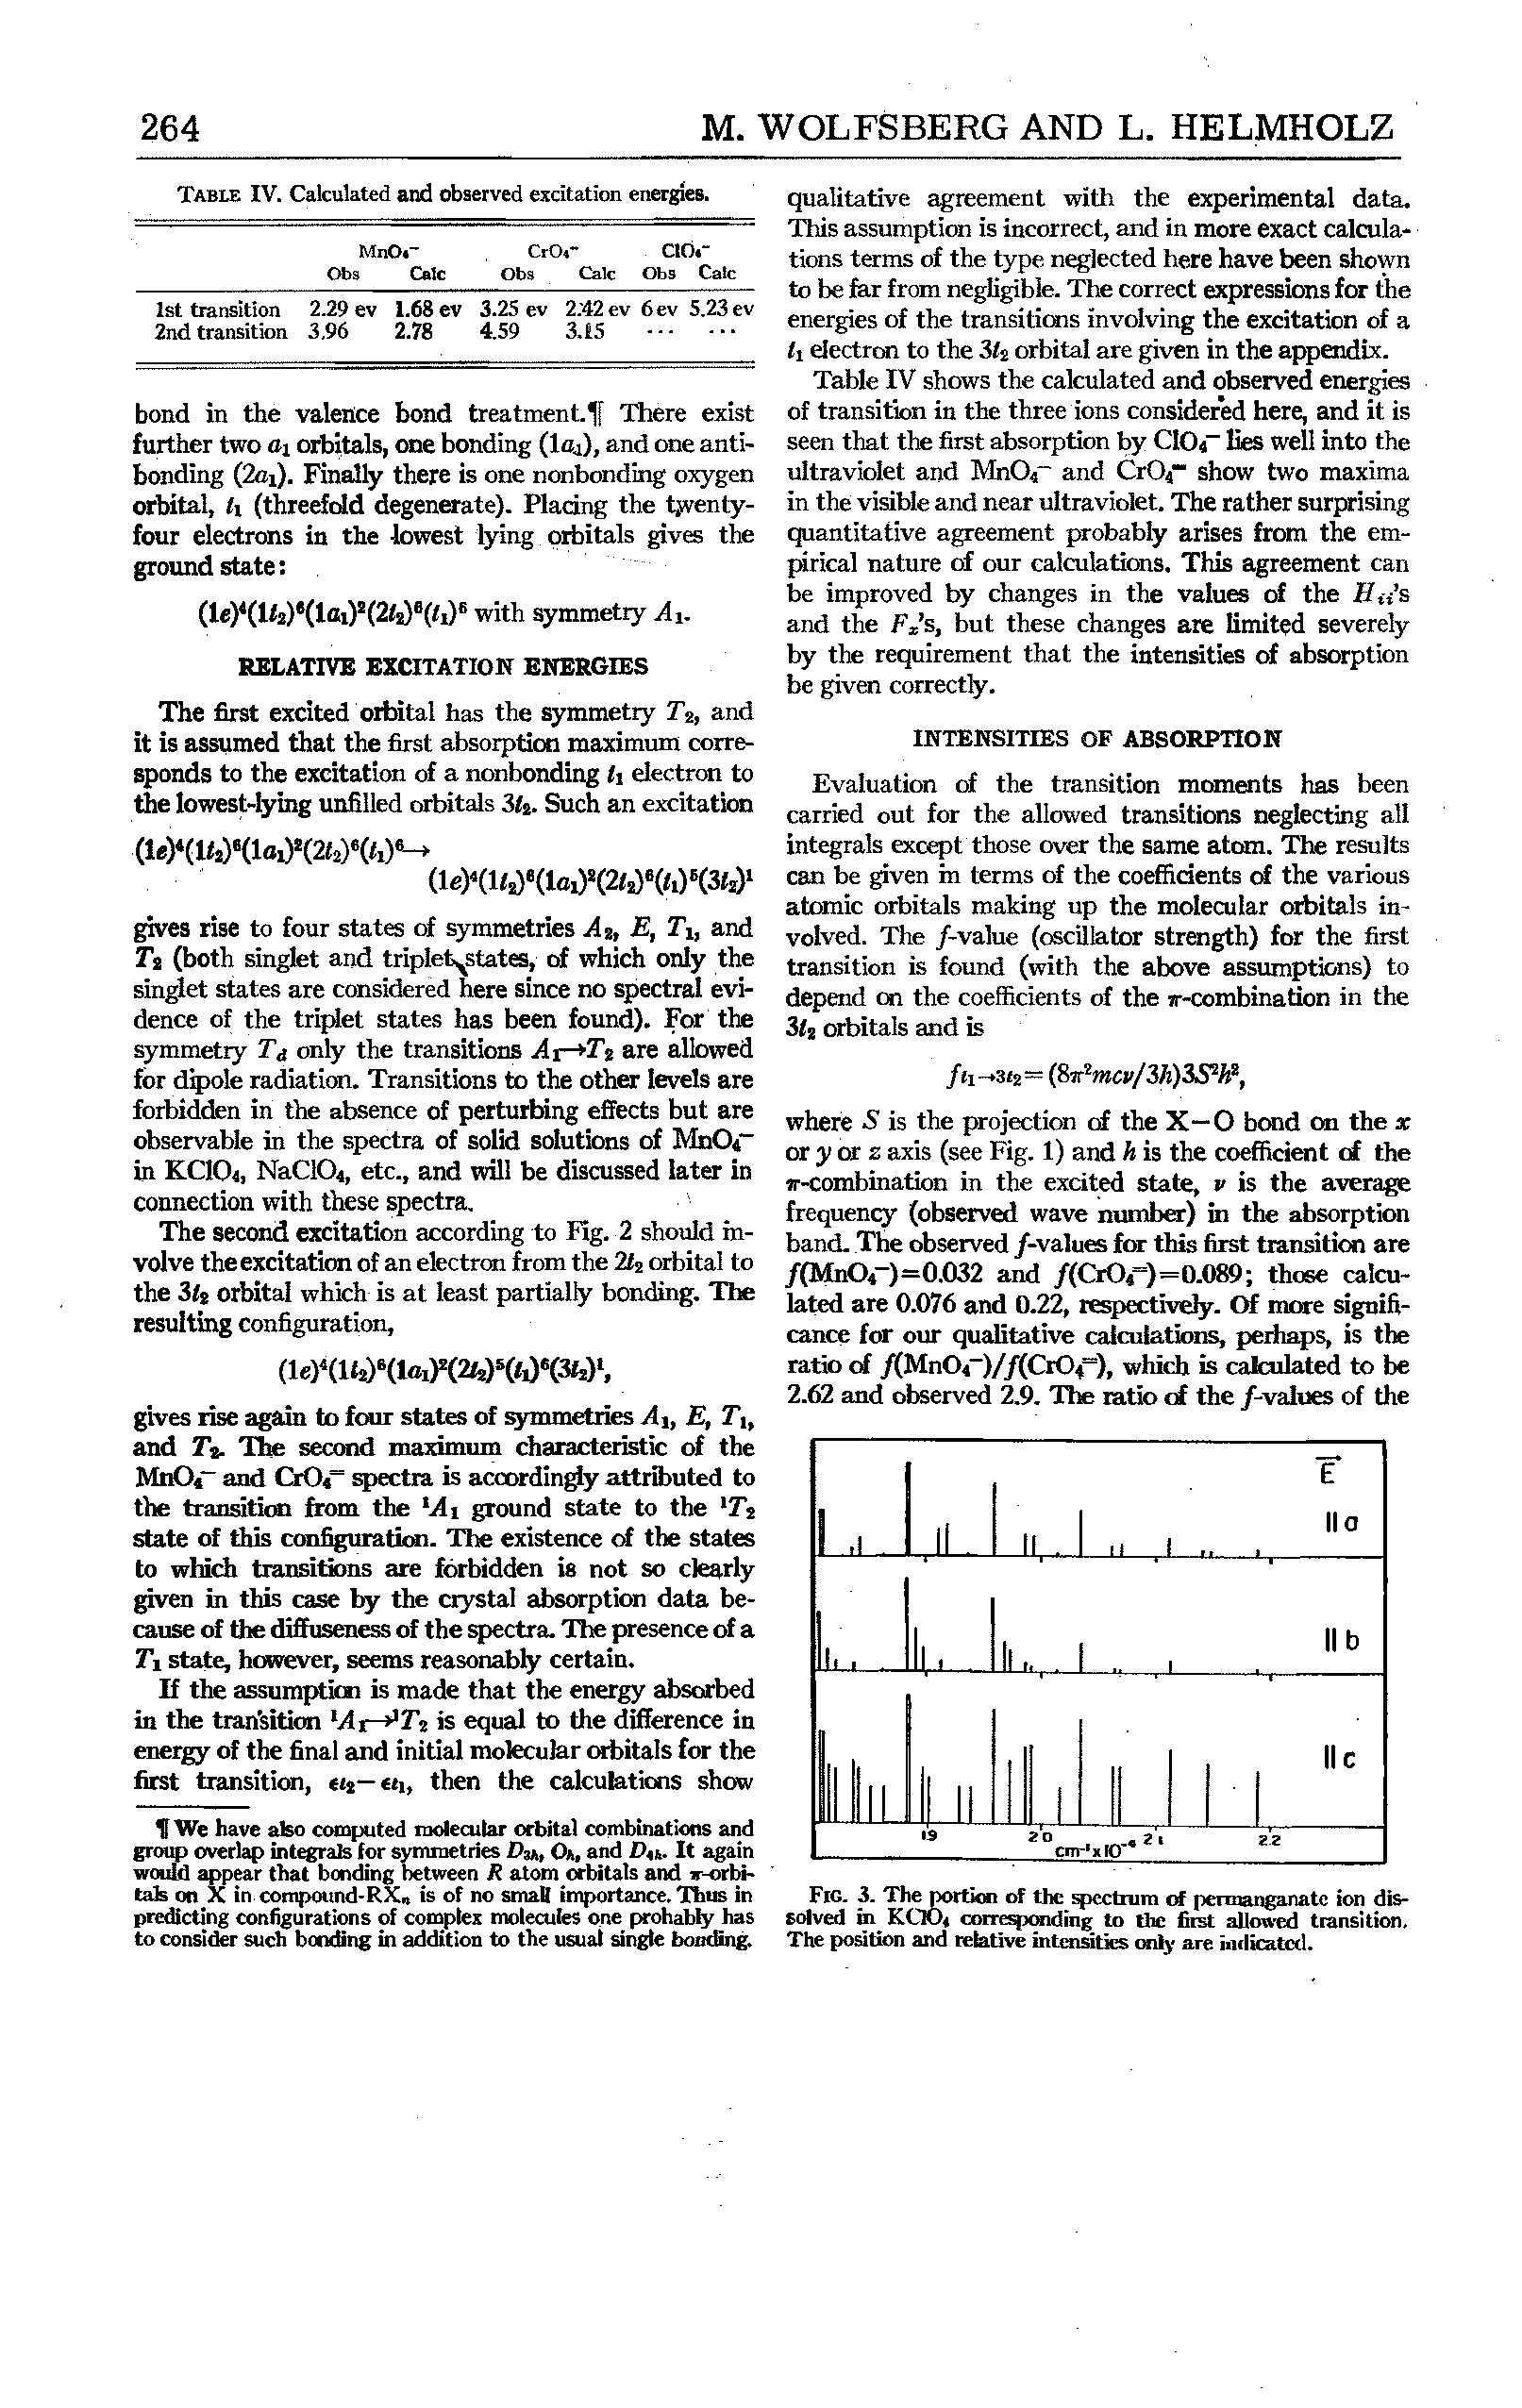 Table IV shows the calculated and observed energies of transition in the three ions considered here, and it is seen that the first absorption by ClO<T lies well into the ultraviolet and MnO<r and CrO show two maxima in the visible and near ultraviolet. The rather surprising quantitative agreement probably arises from the empirical nature of our calculations. This agreement can be improved by changes in the values of the Hu s and the /Vs, but these changes are limited severely by the requirement that the intensities of absorption be given correctly.